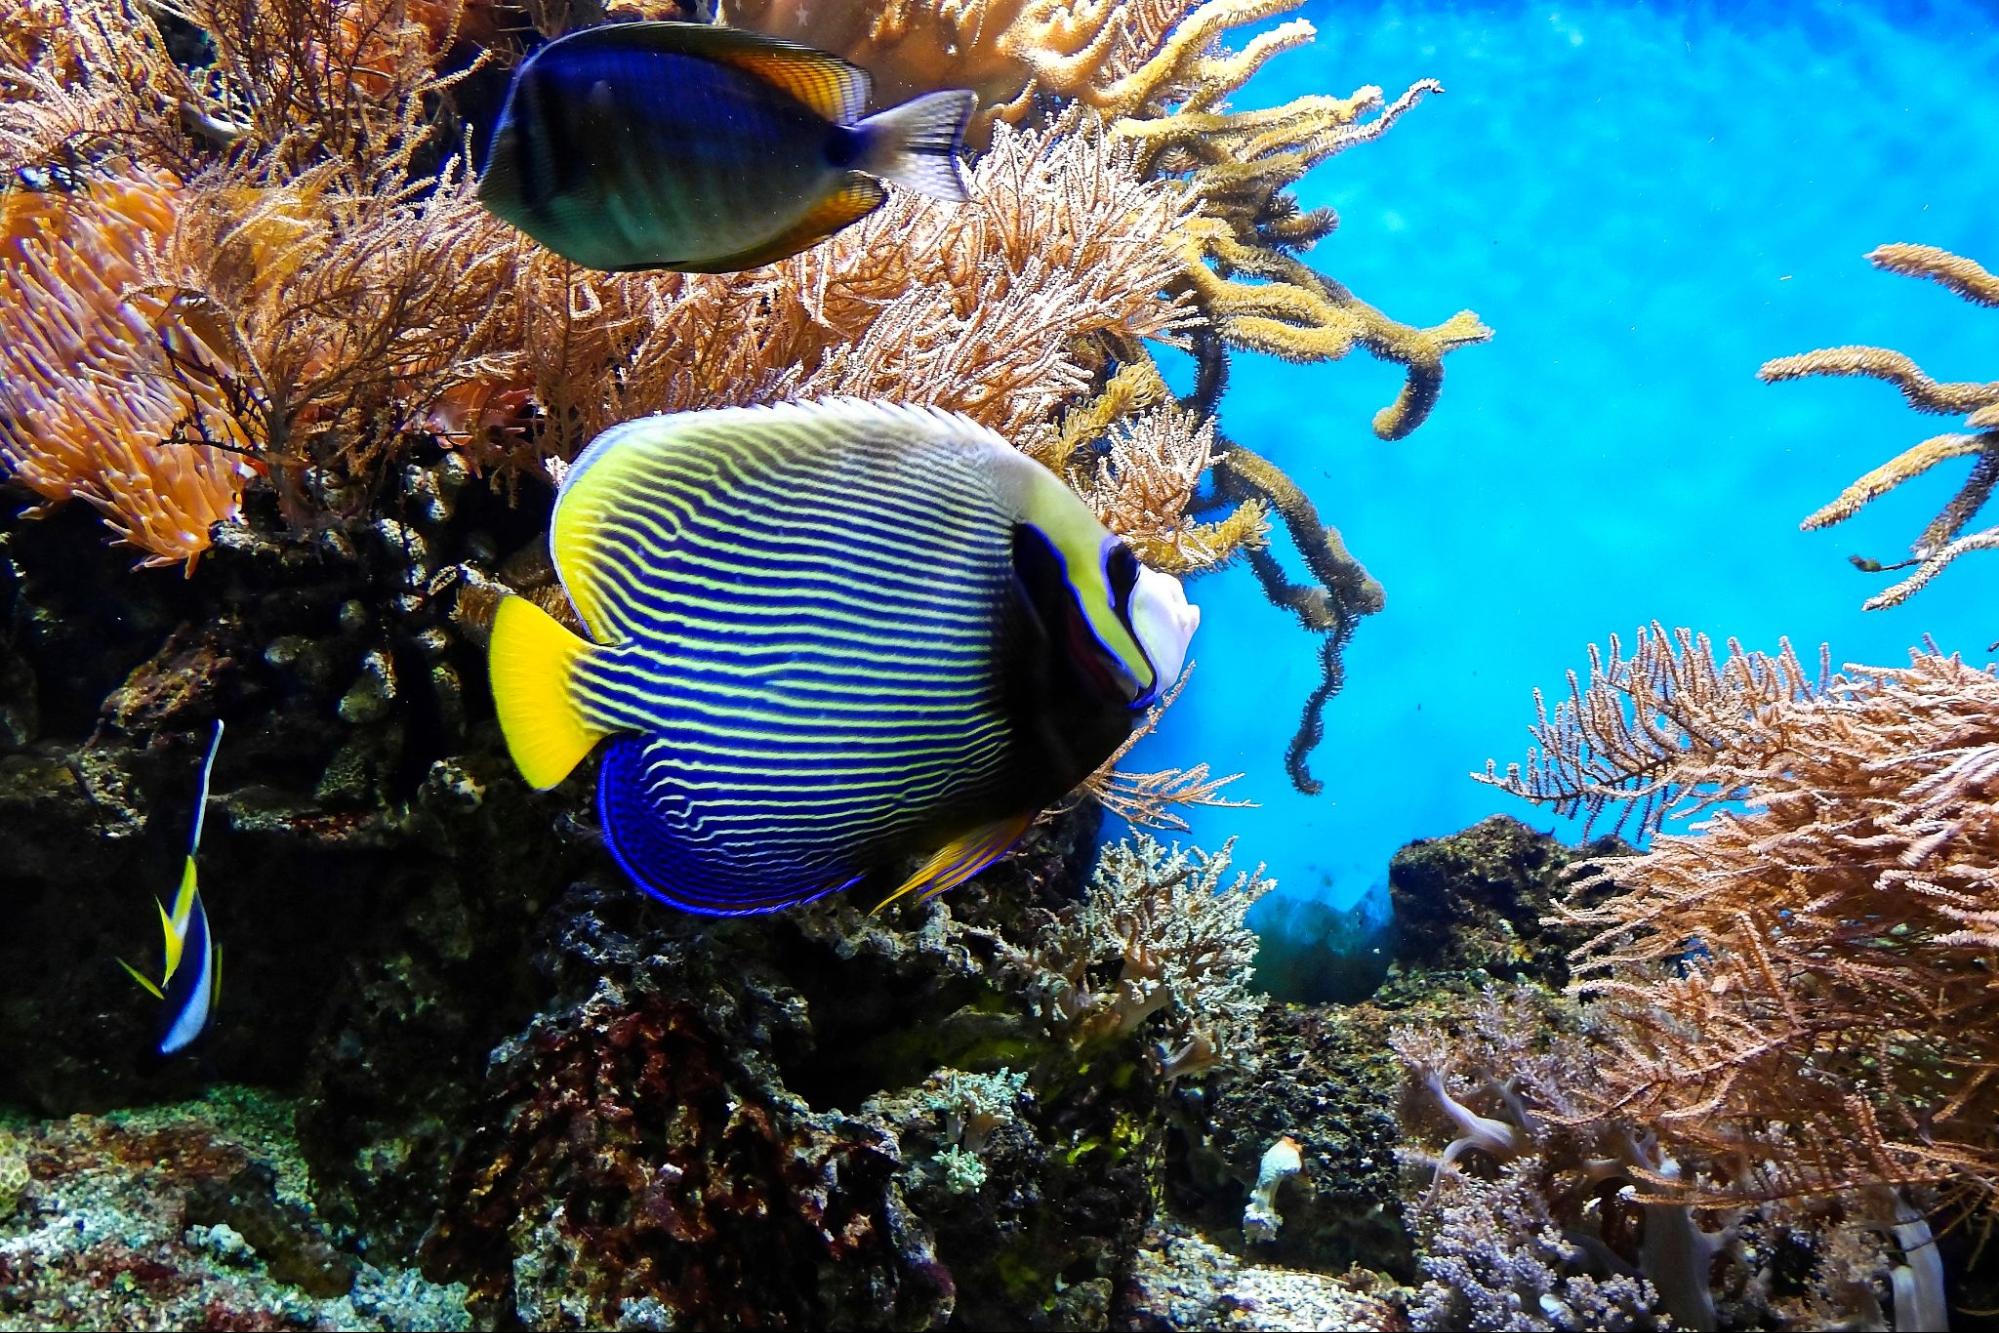 Click, Clack, and Pop: Sounds Indicate Health of Coral Reefs